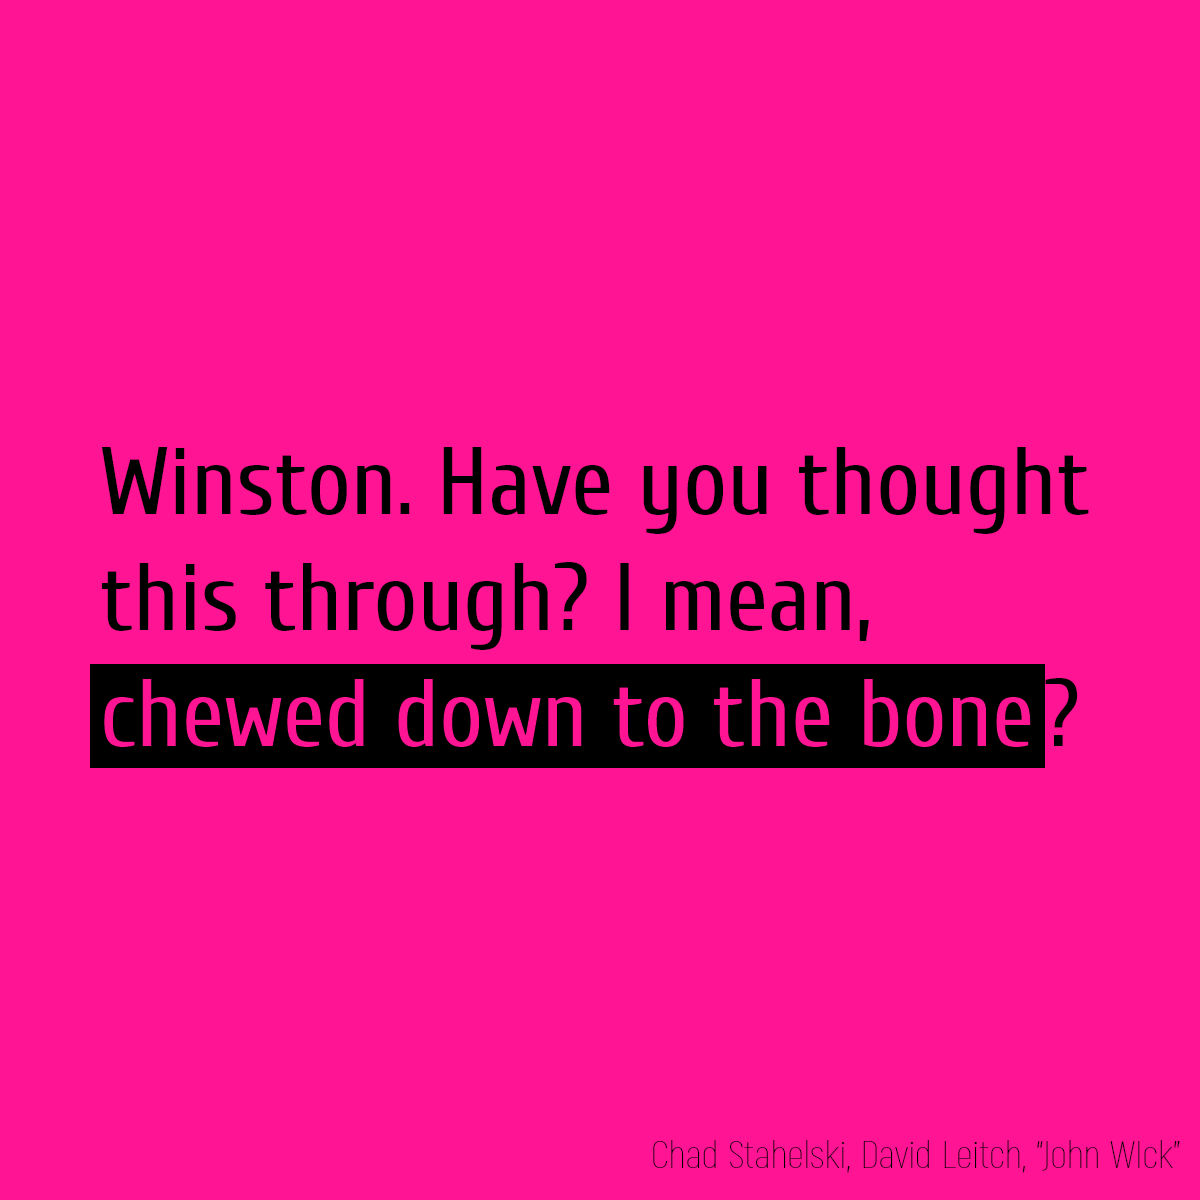 Winston. Have you thought this through? I mean, **chewed down to the bone**?